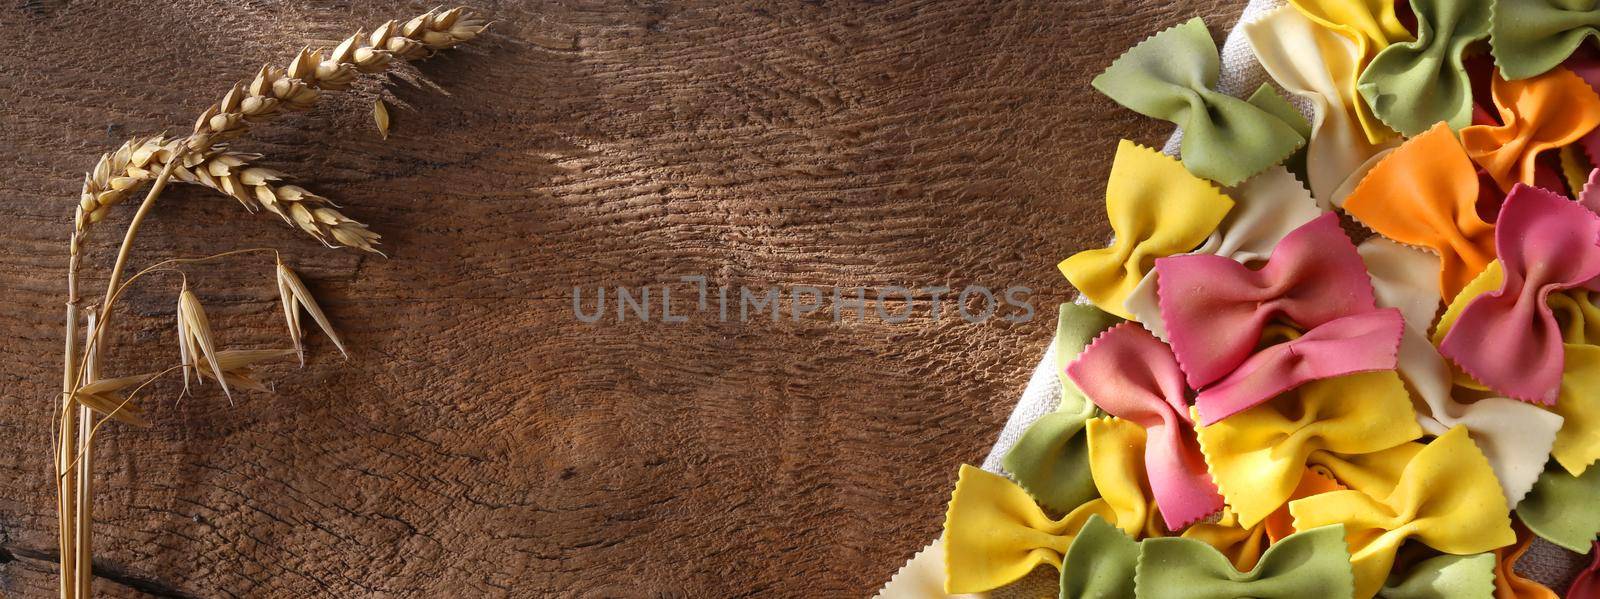 Italian pasta farfalle. Colourful pasta background with rye on old wooden rustic kitchen background. Pasta recipes concept. Horizontal flat lay. Place for text, copy space